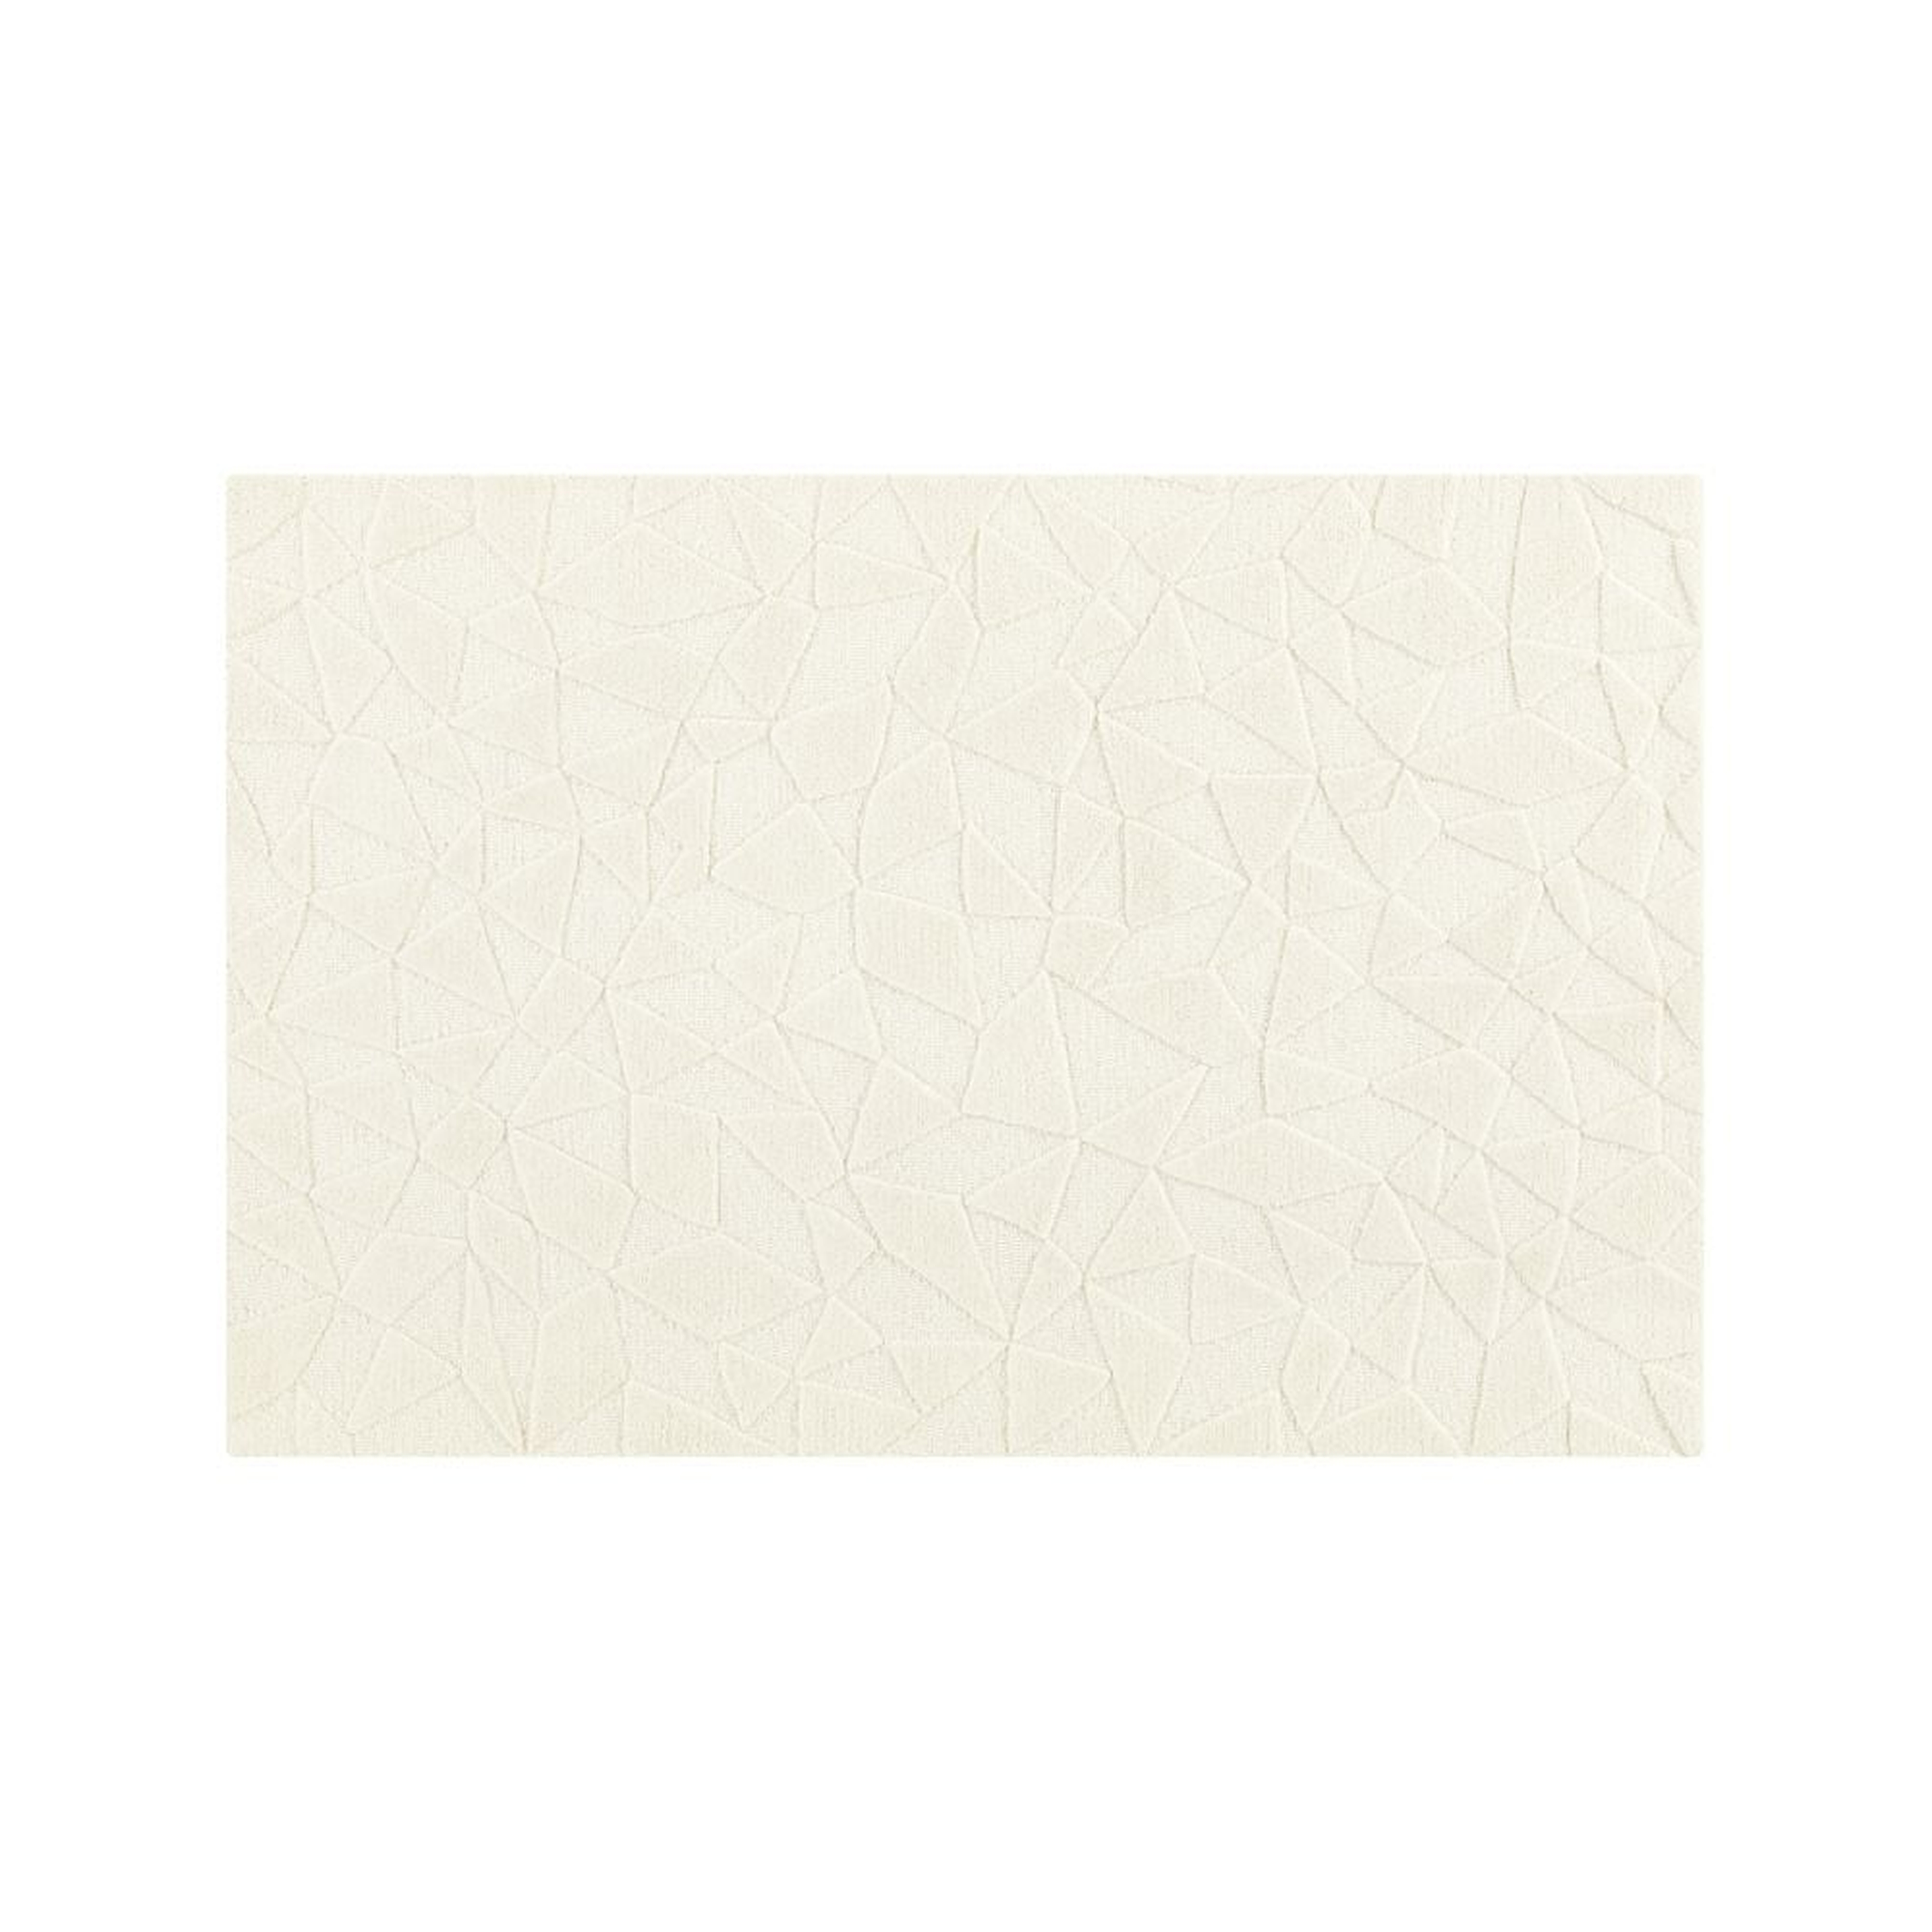 Modern Solid Cream Rug 4'x6' - Crate and Barrel